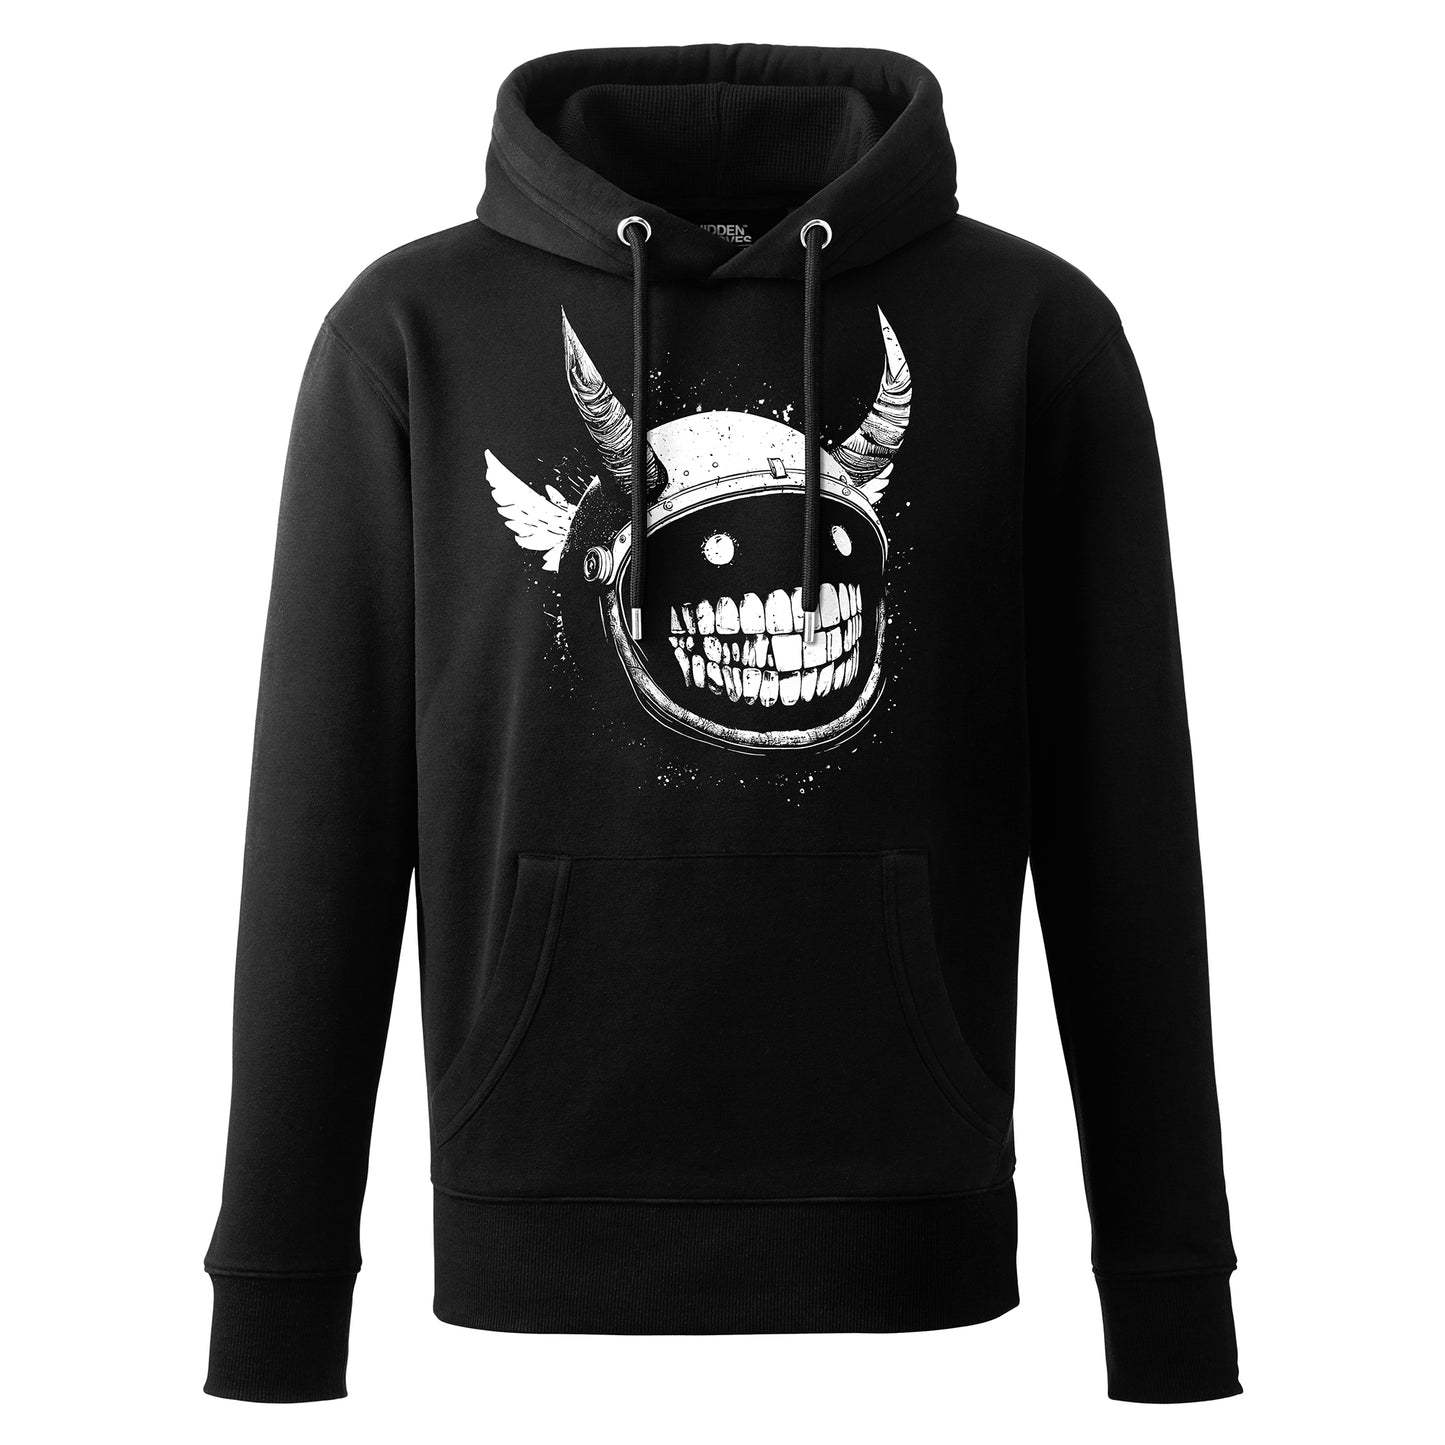 Mouthful: Black Graphic Hoodie